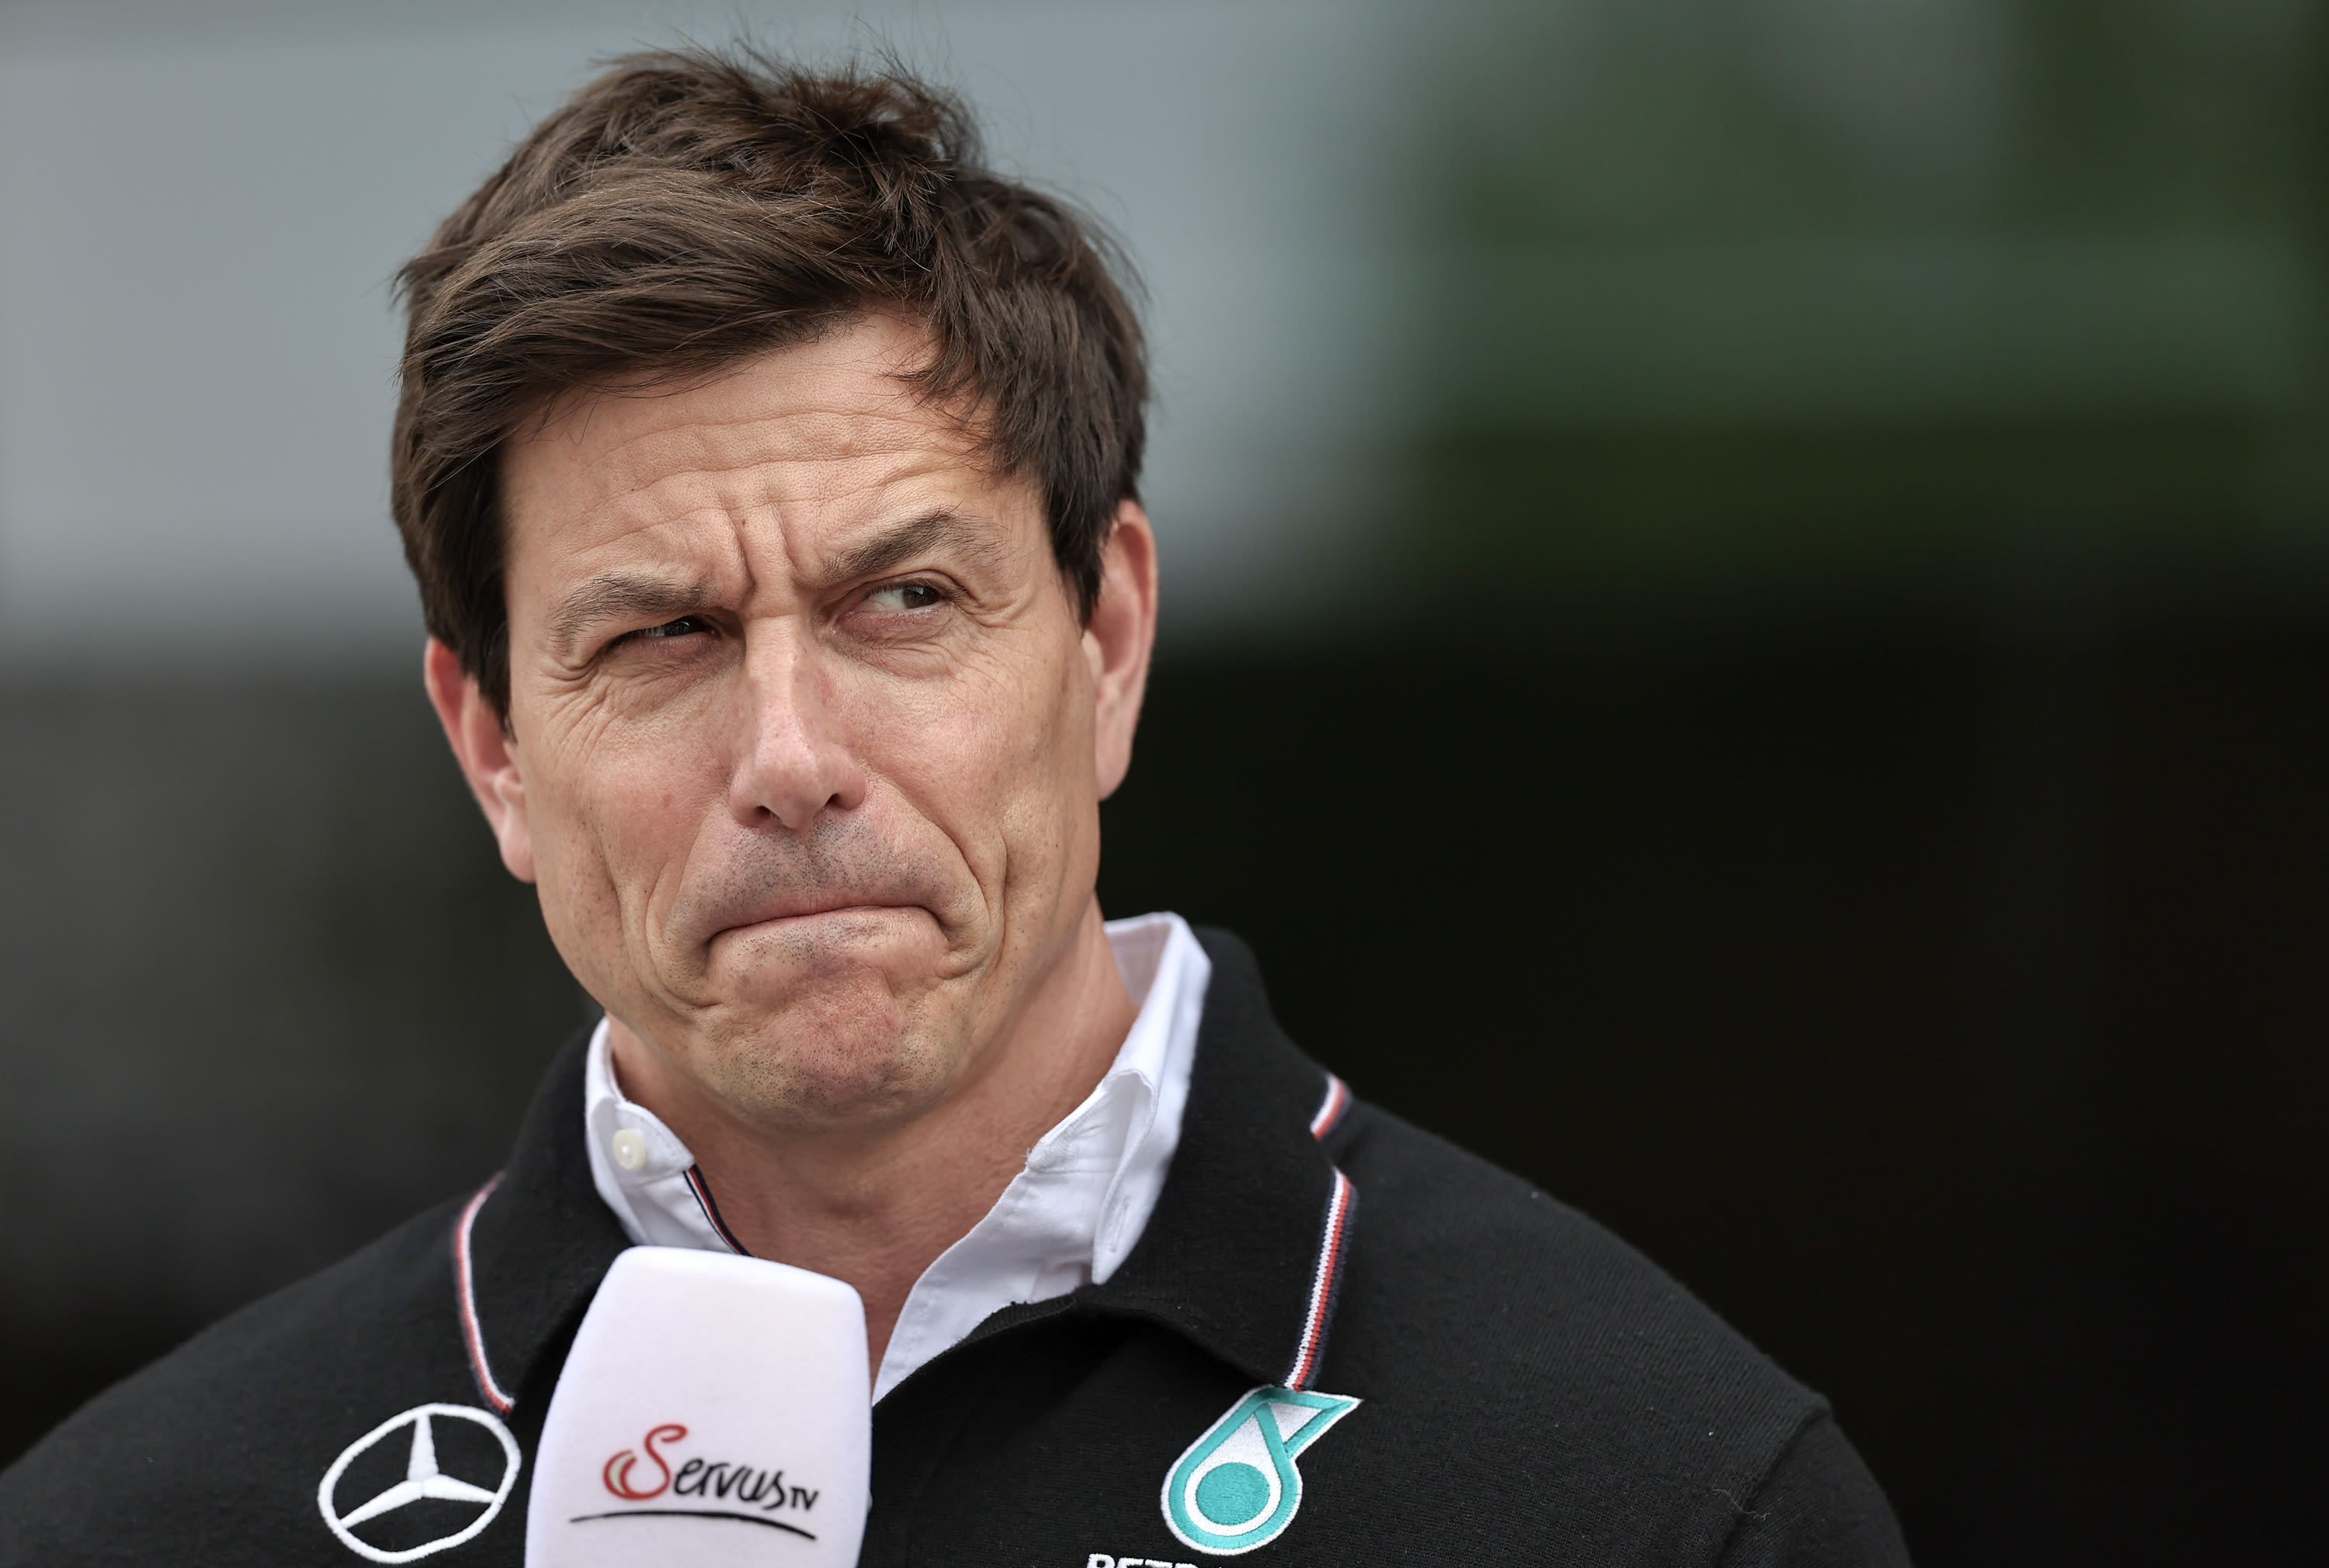 Toto Wolff Outraged After Mercedes' 'Total Underperformance' In Hungary